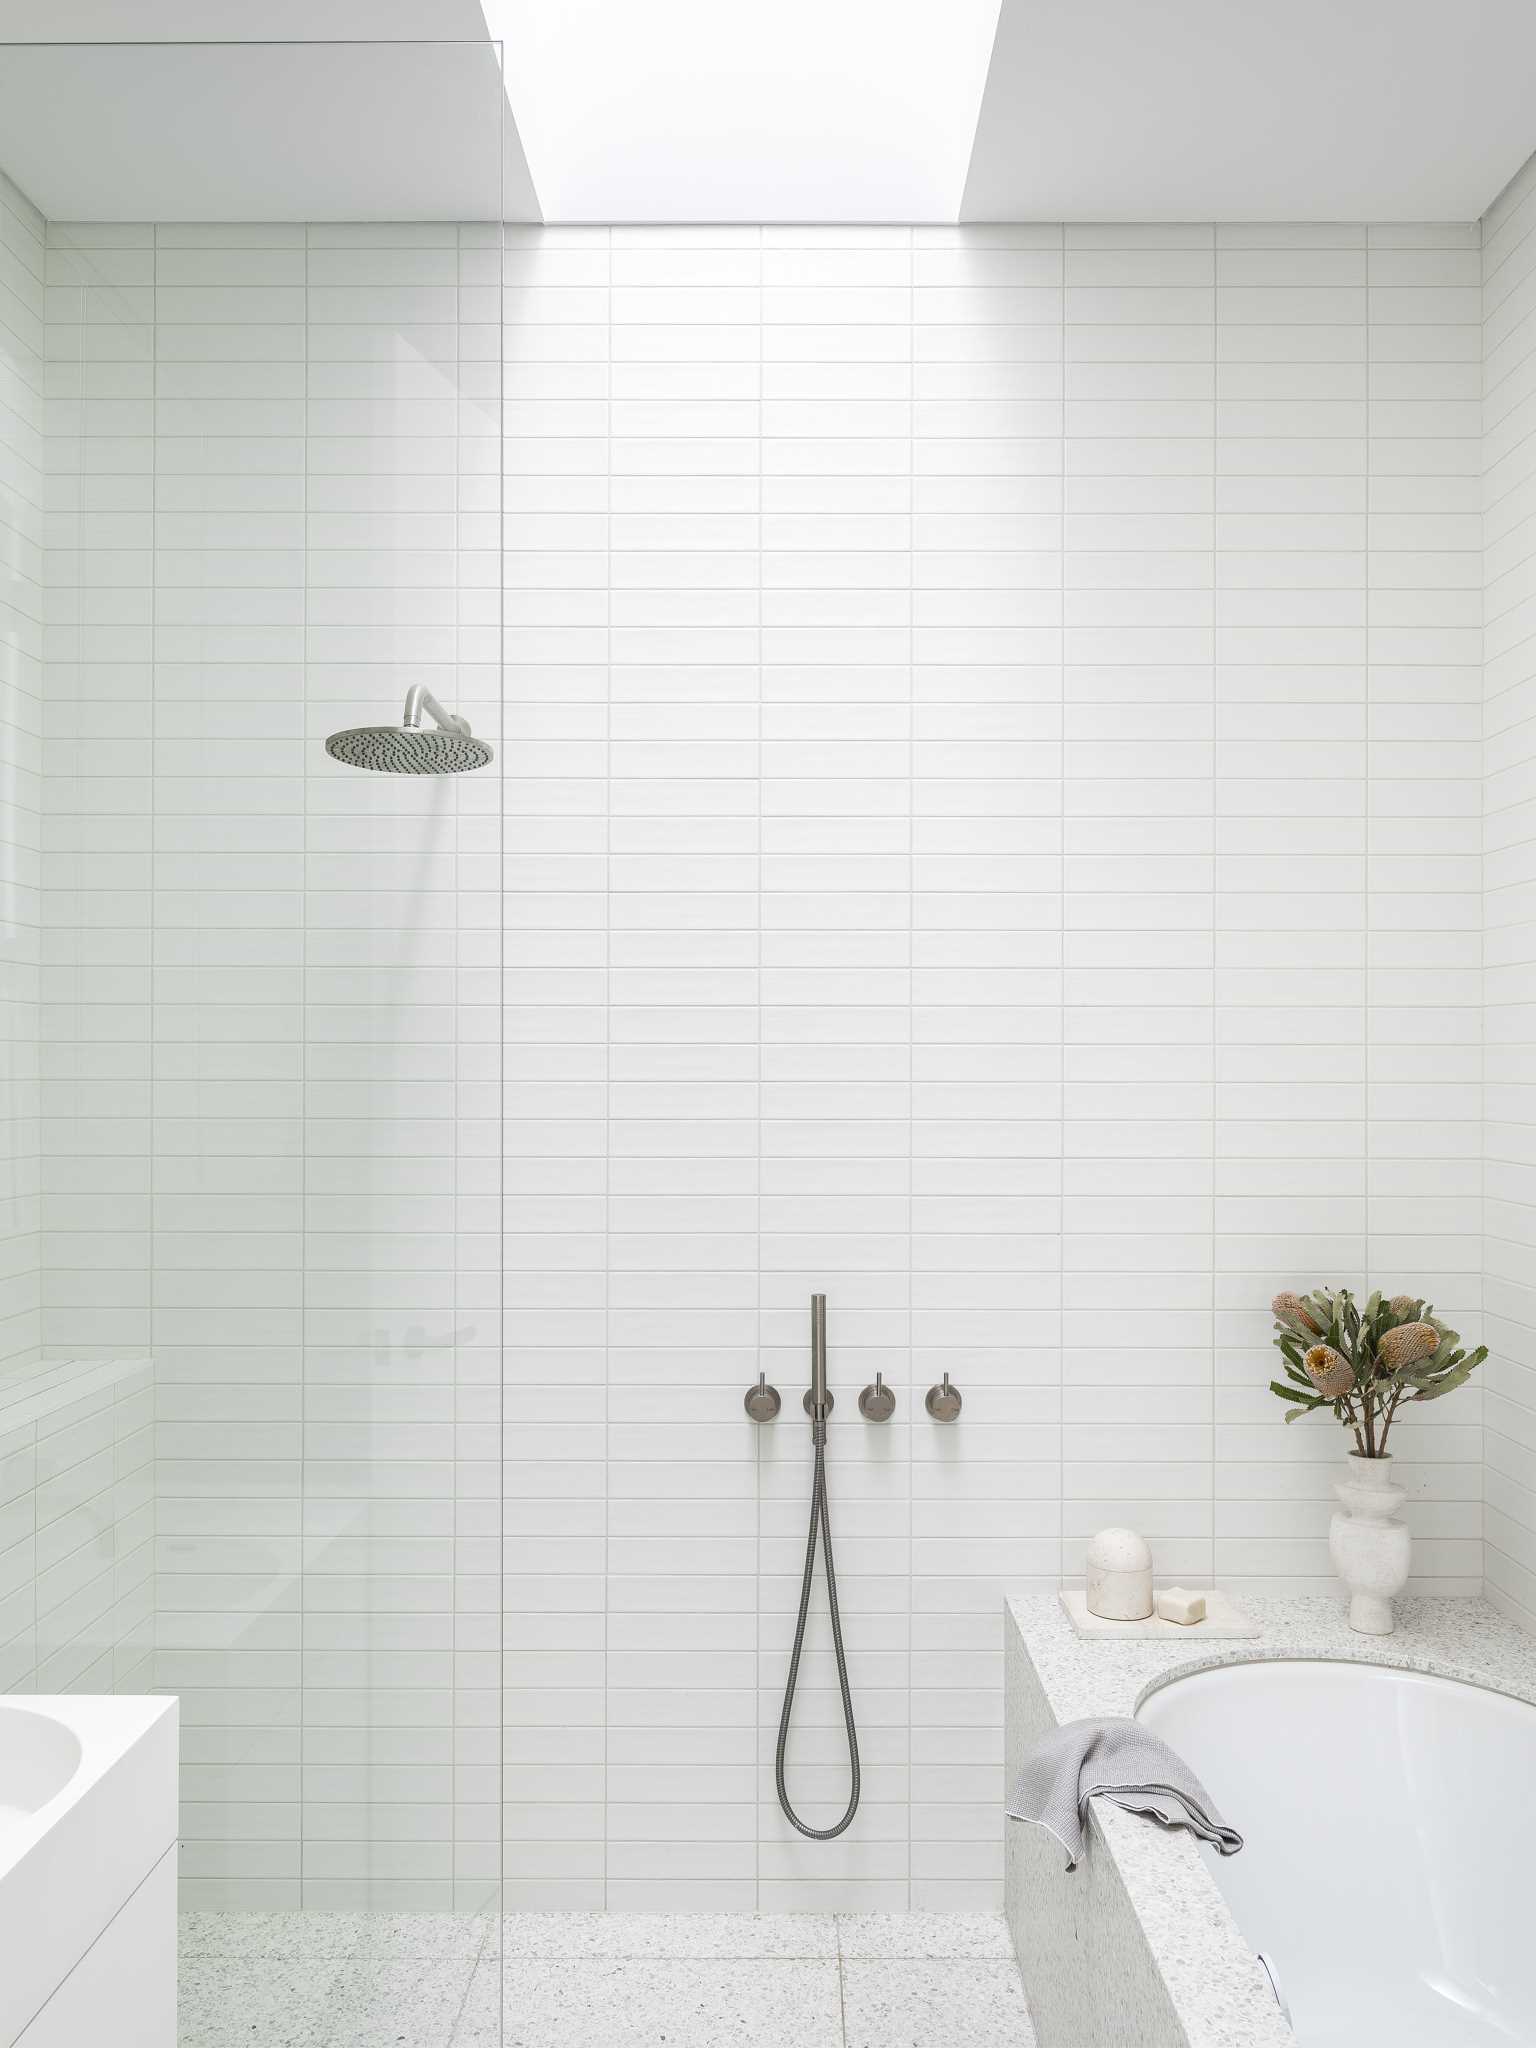 A modern bathroom with a built-in bathtub and tiled walls.